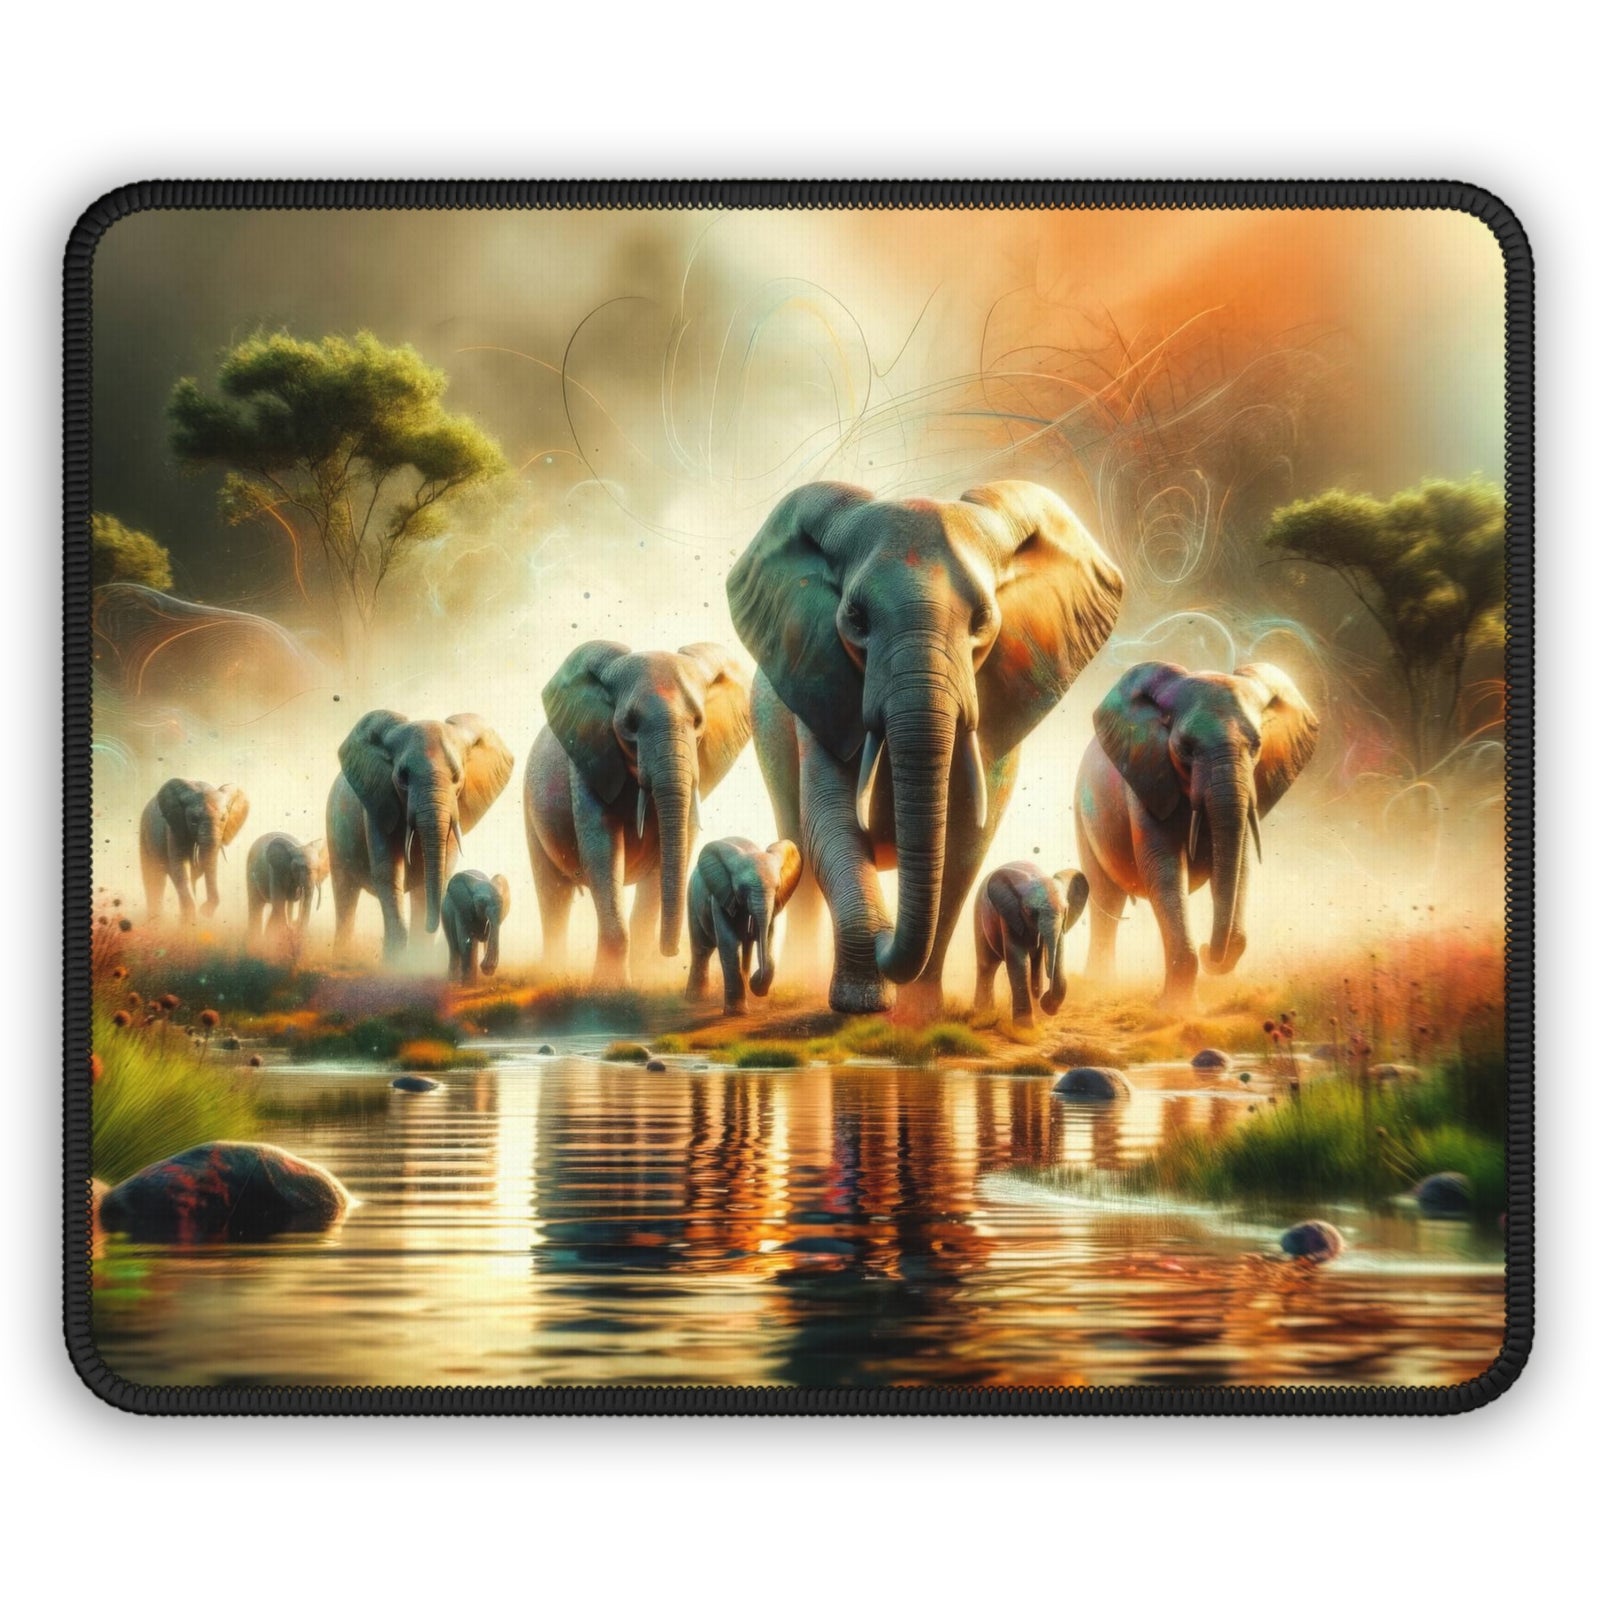 Elephants in Morning Mist Gaming Mouse Pad